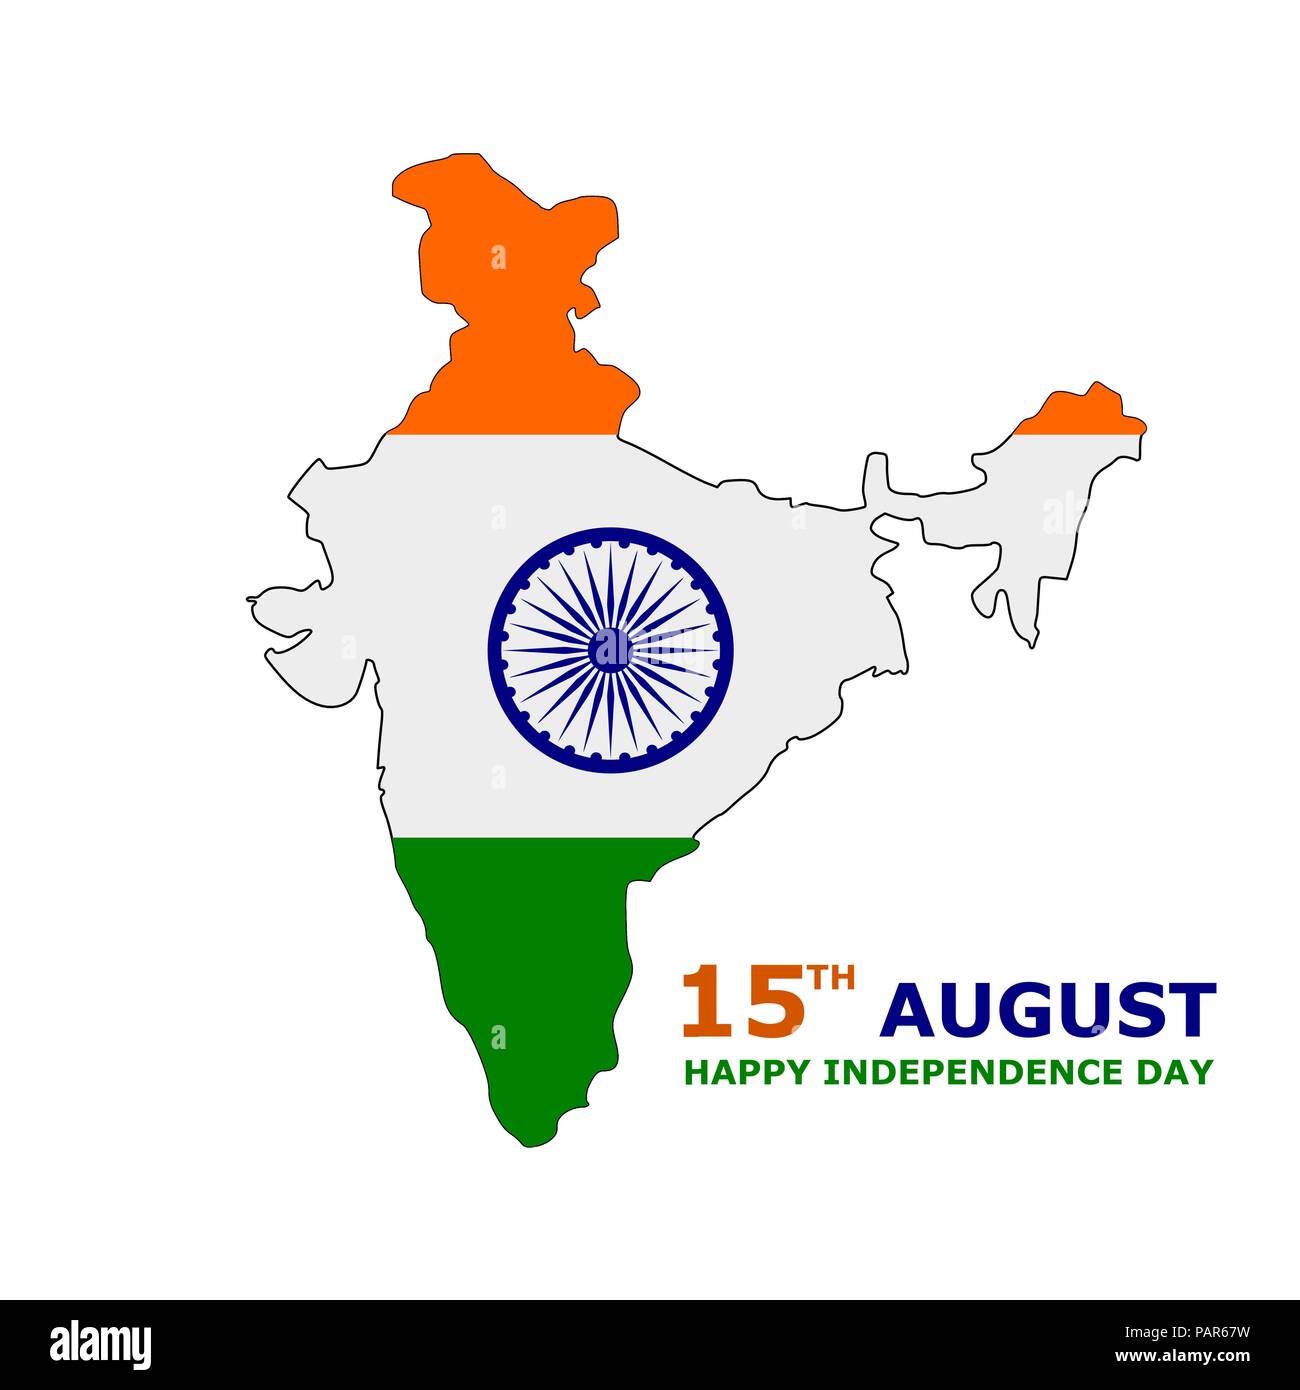 India map flag vector with independence day wishes Stock Vector